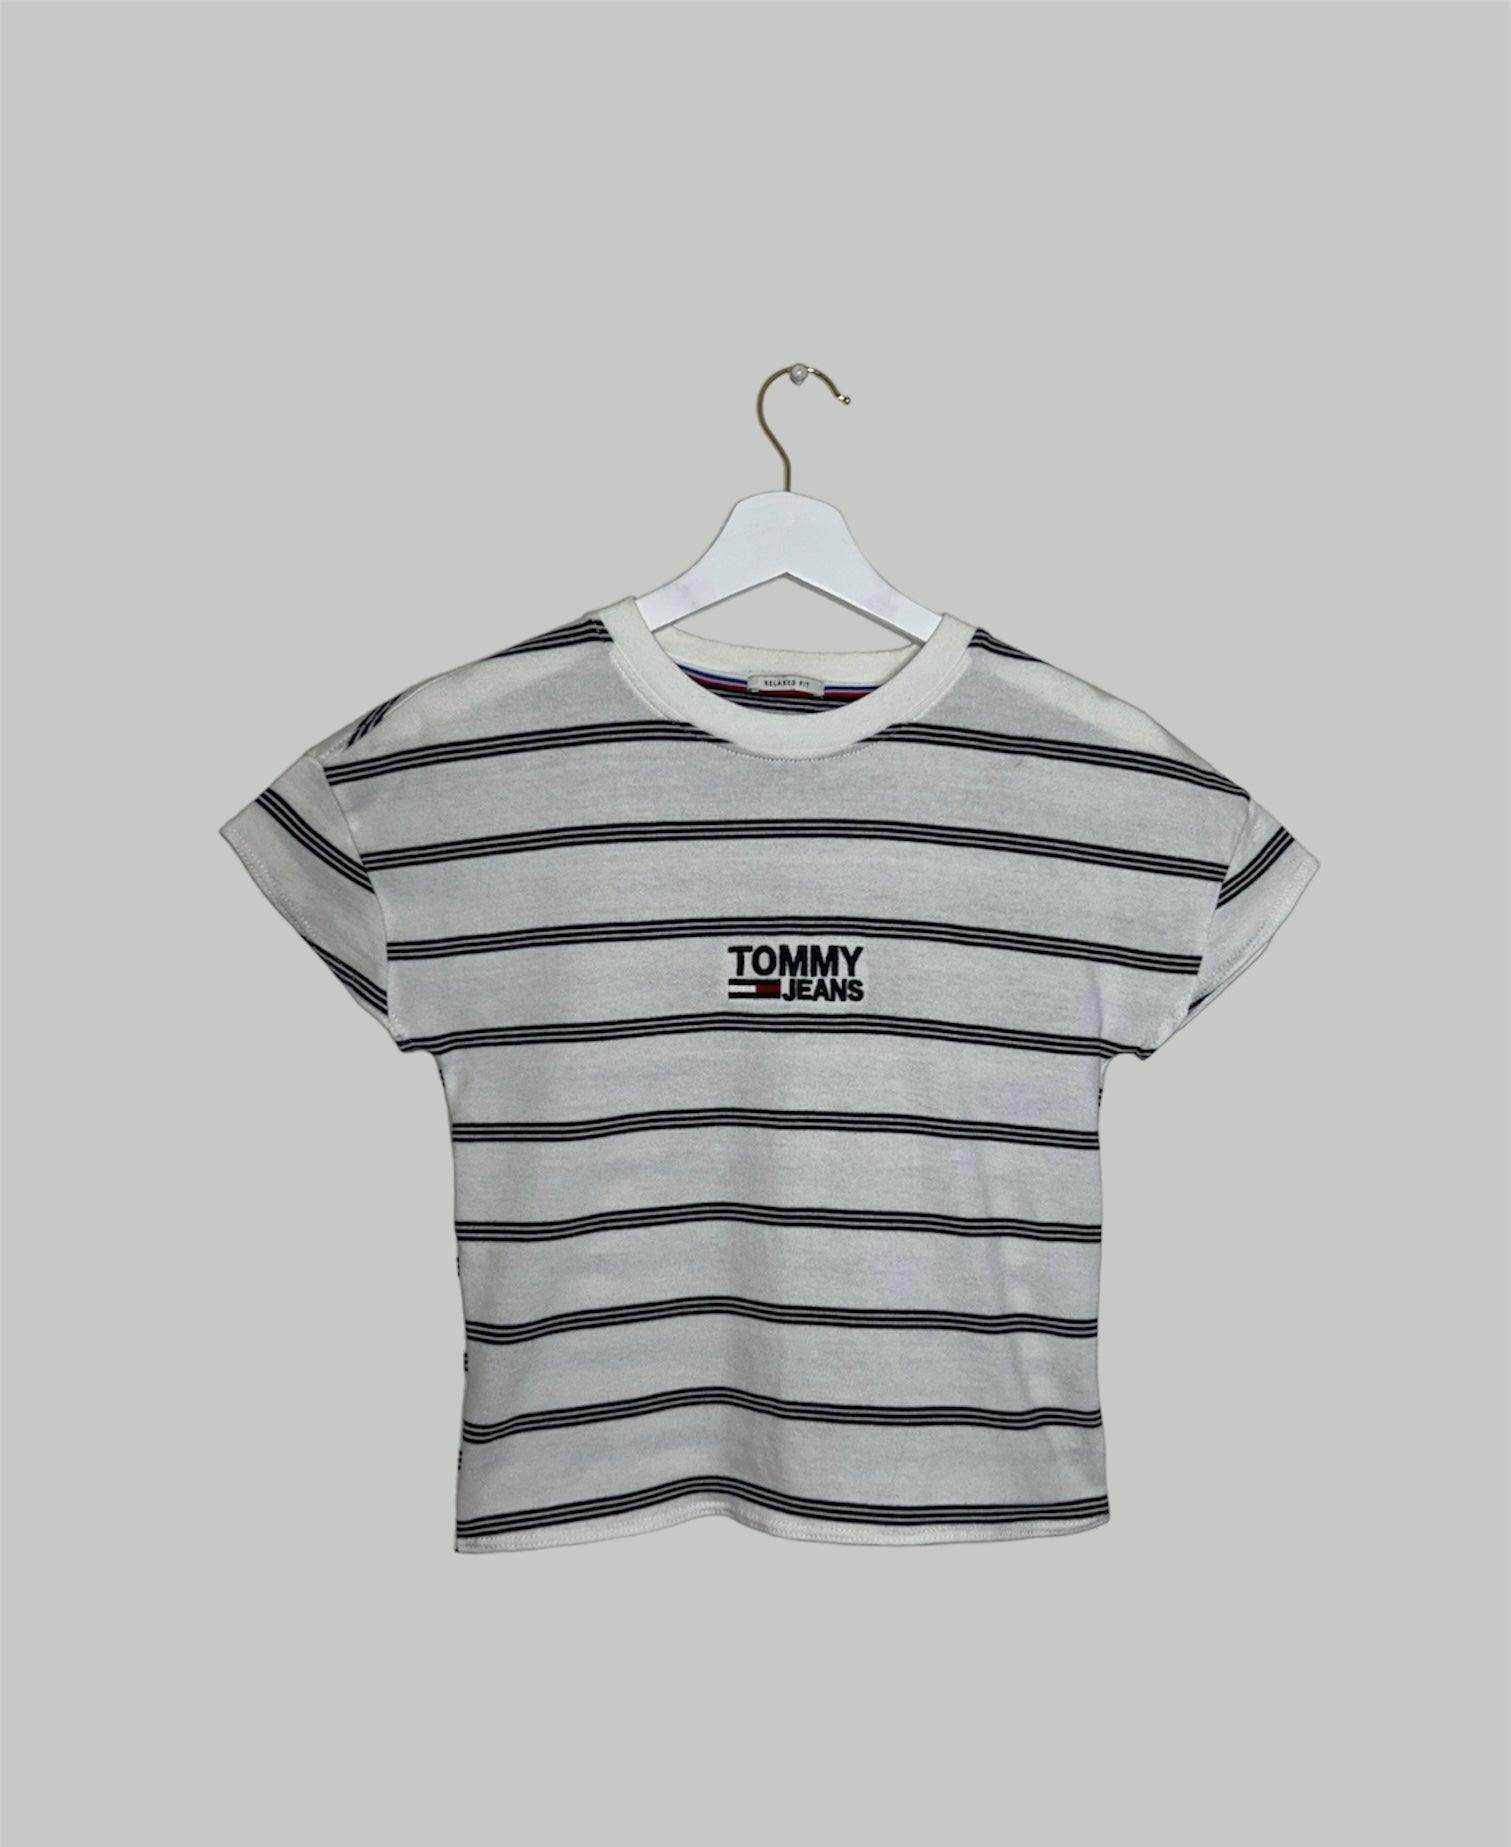 white stripe short sleeve crop top with black tommy jeans logo